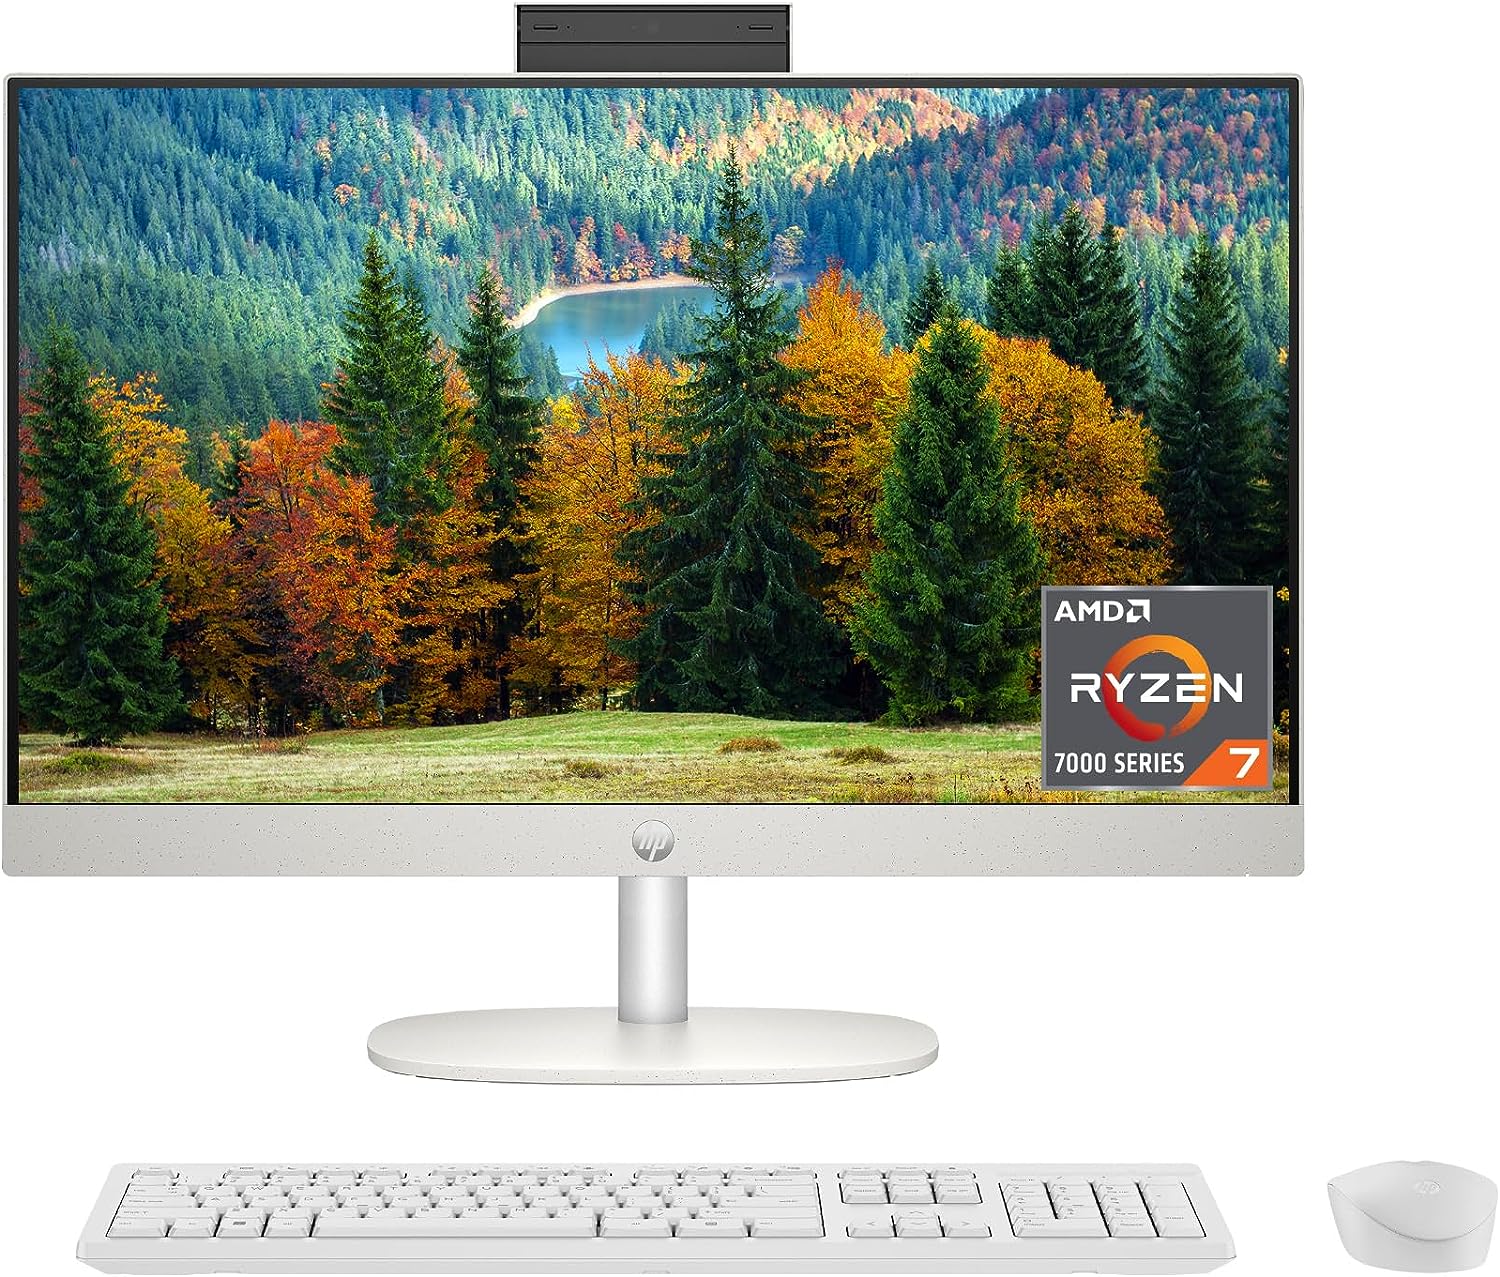 HP 24 All-in-One Desktop Review